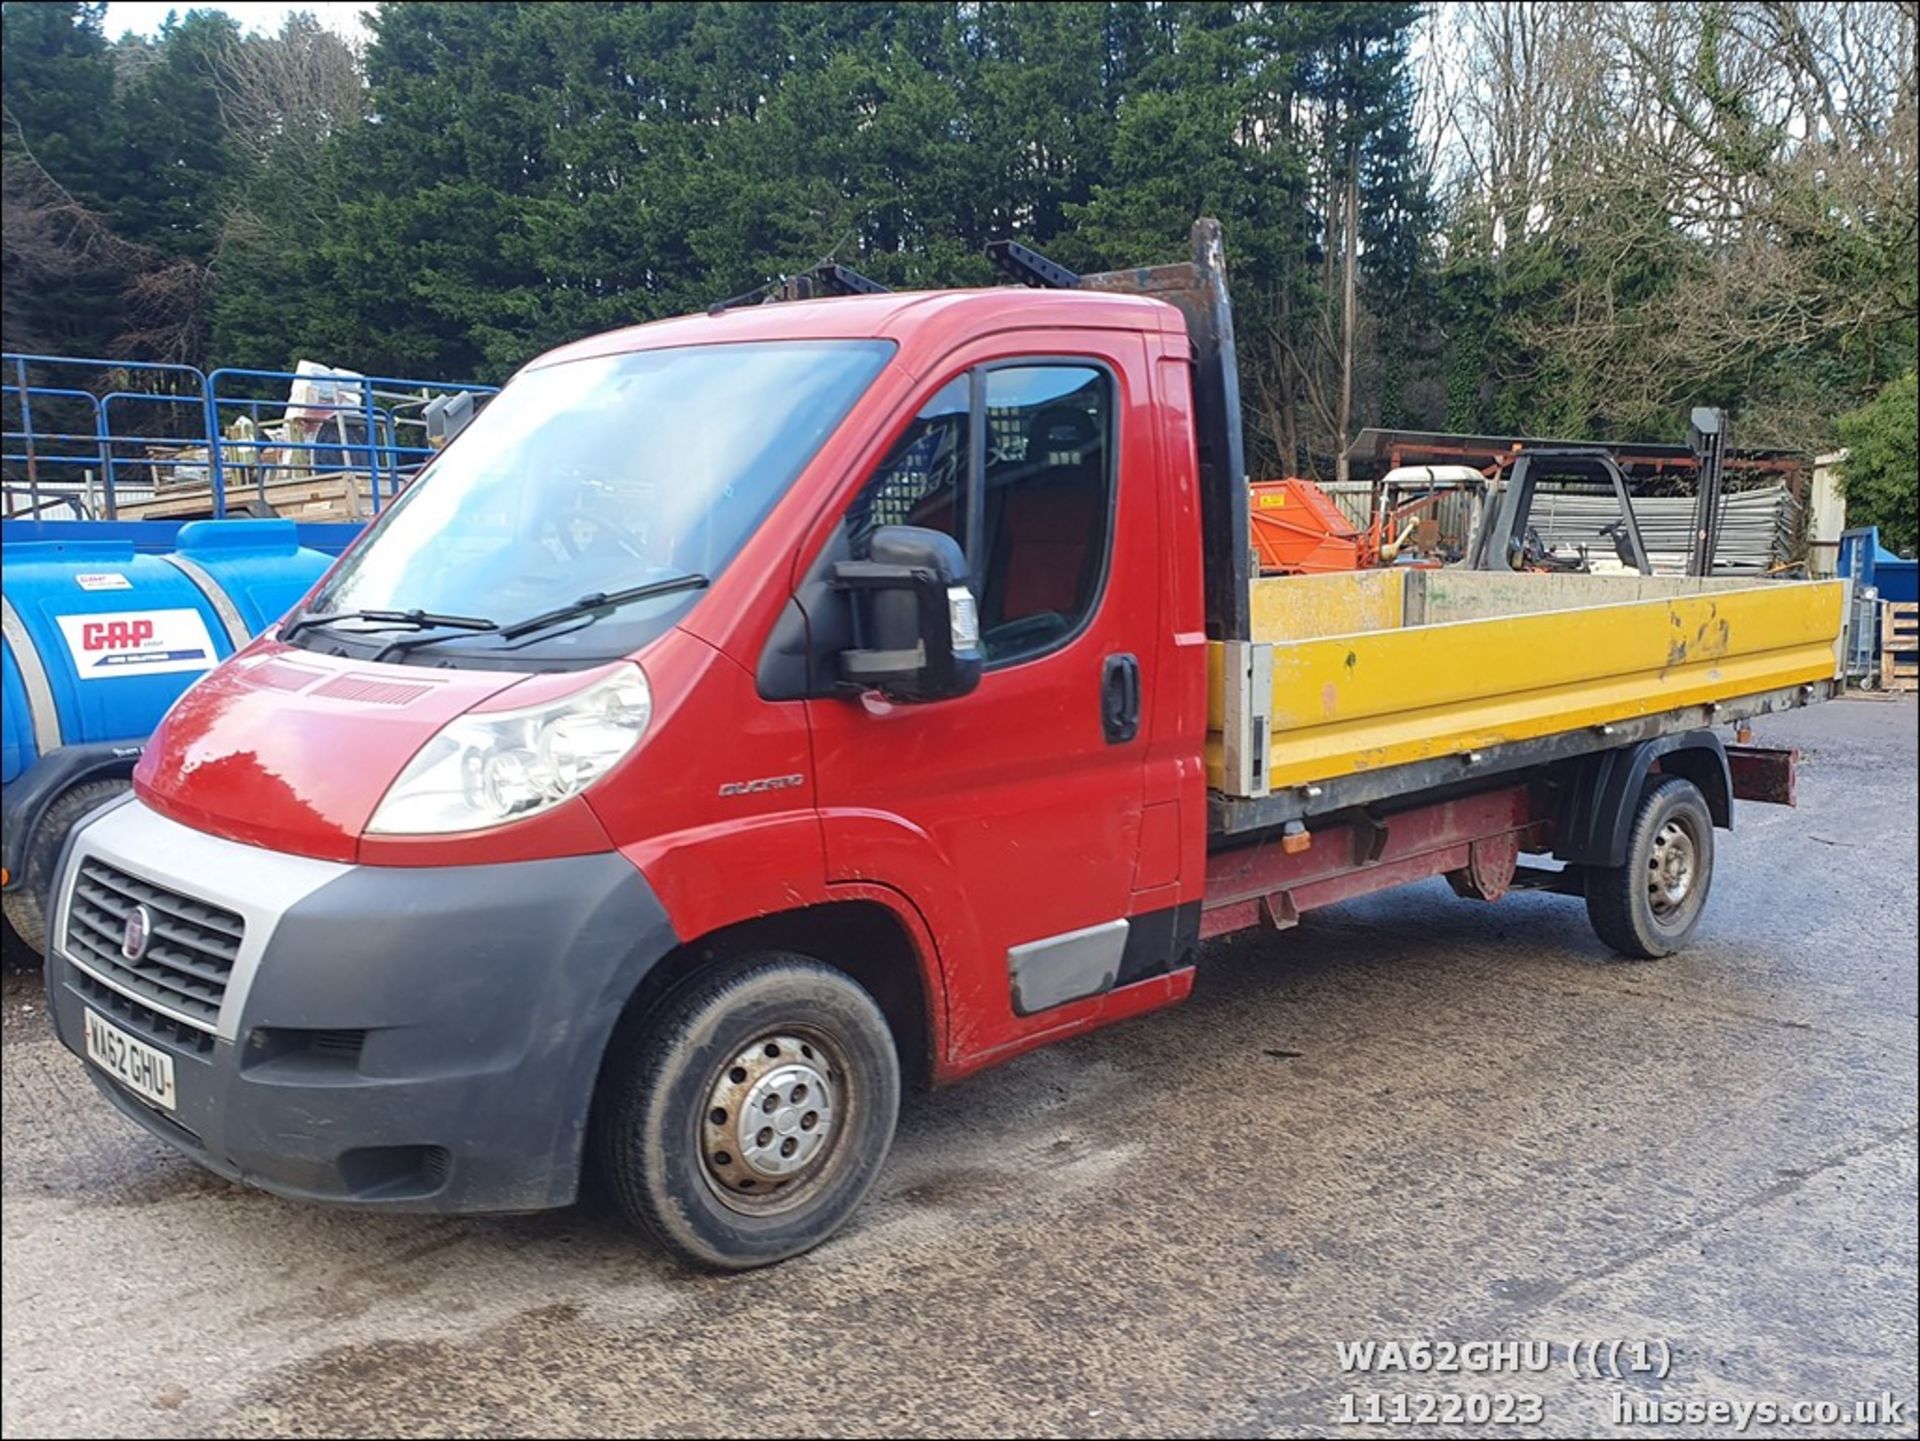 12/62 FIAT DUCATO 35 MULTIJET - 2287cc 2.dr Flat Bed (Red)